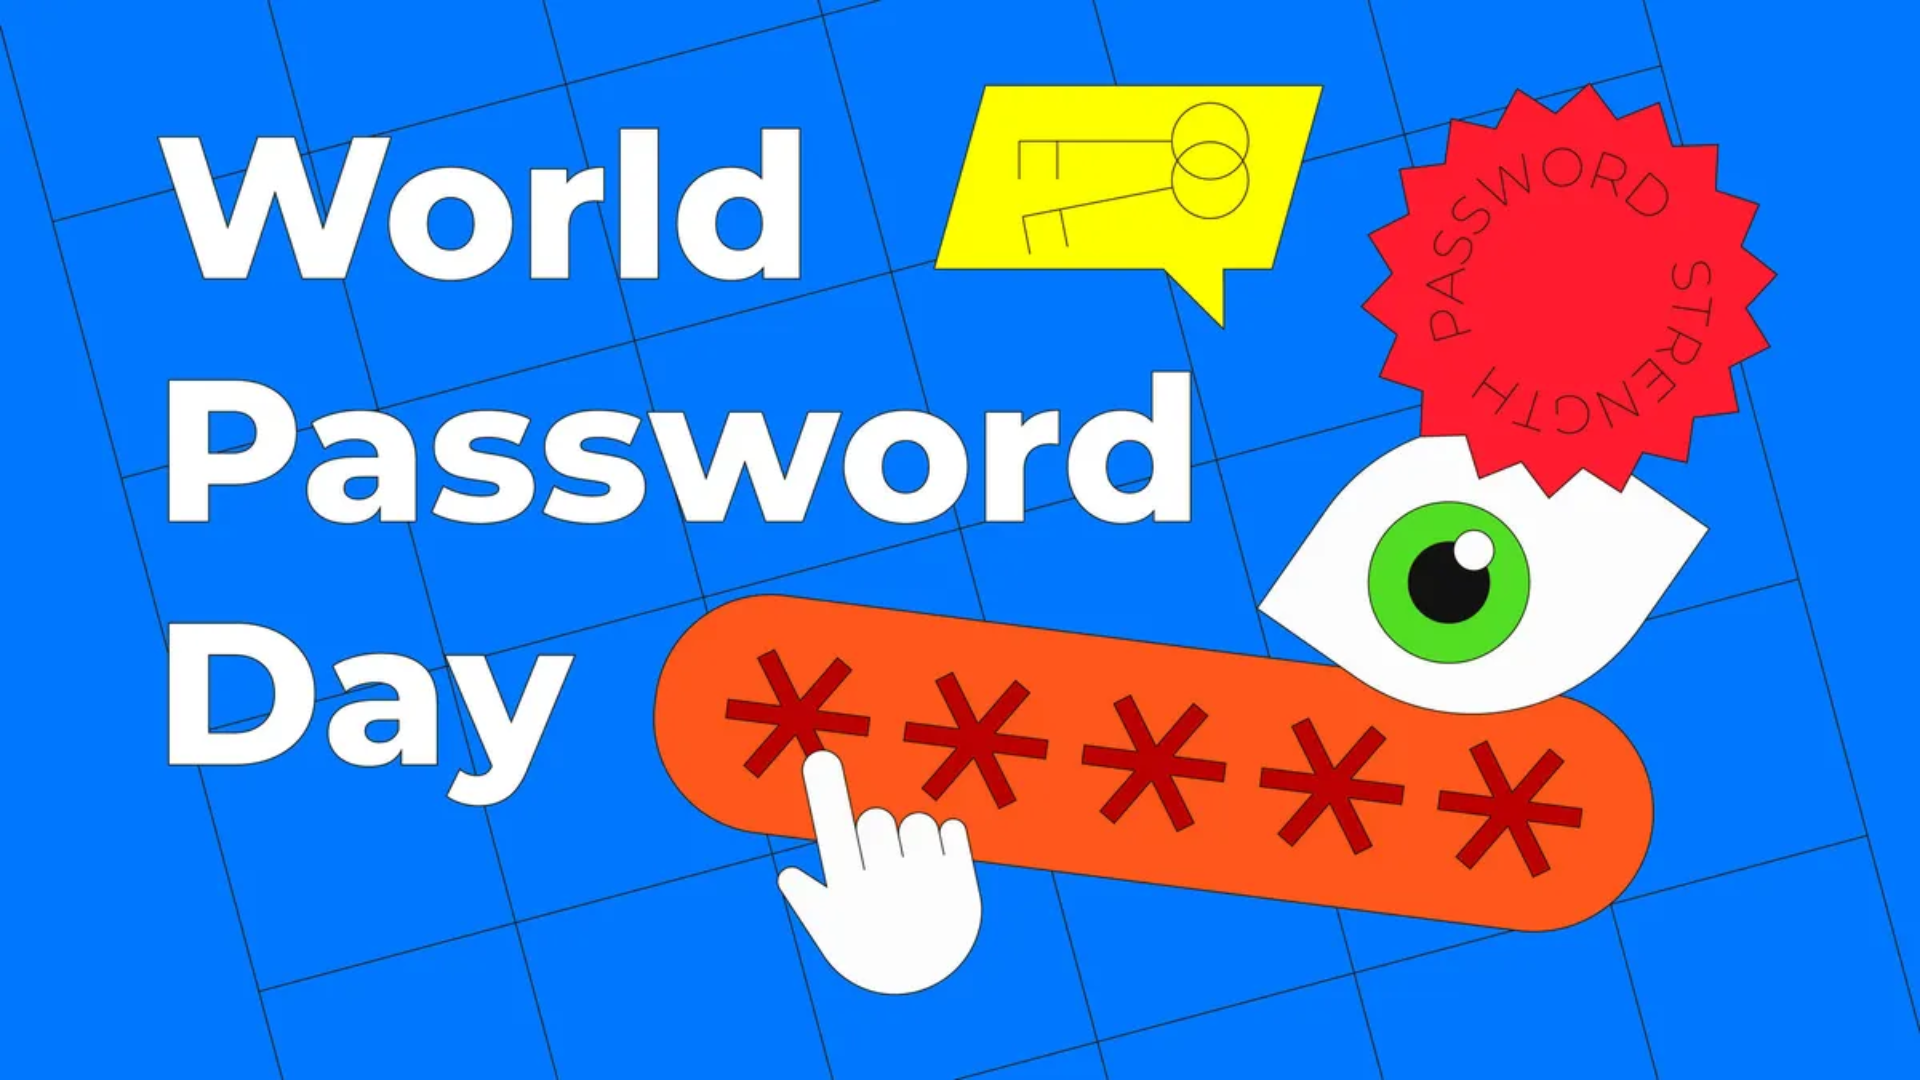 What is World Password Day? Why was it launched in 2013?